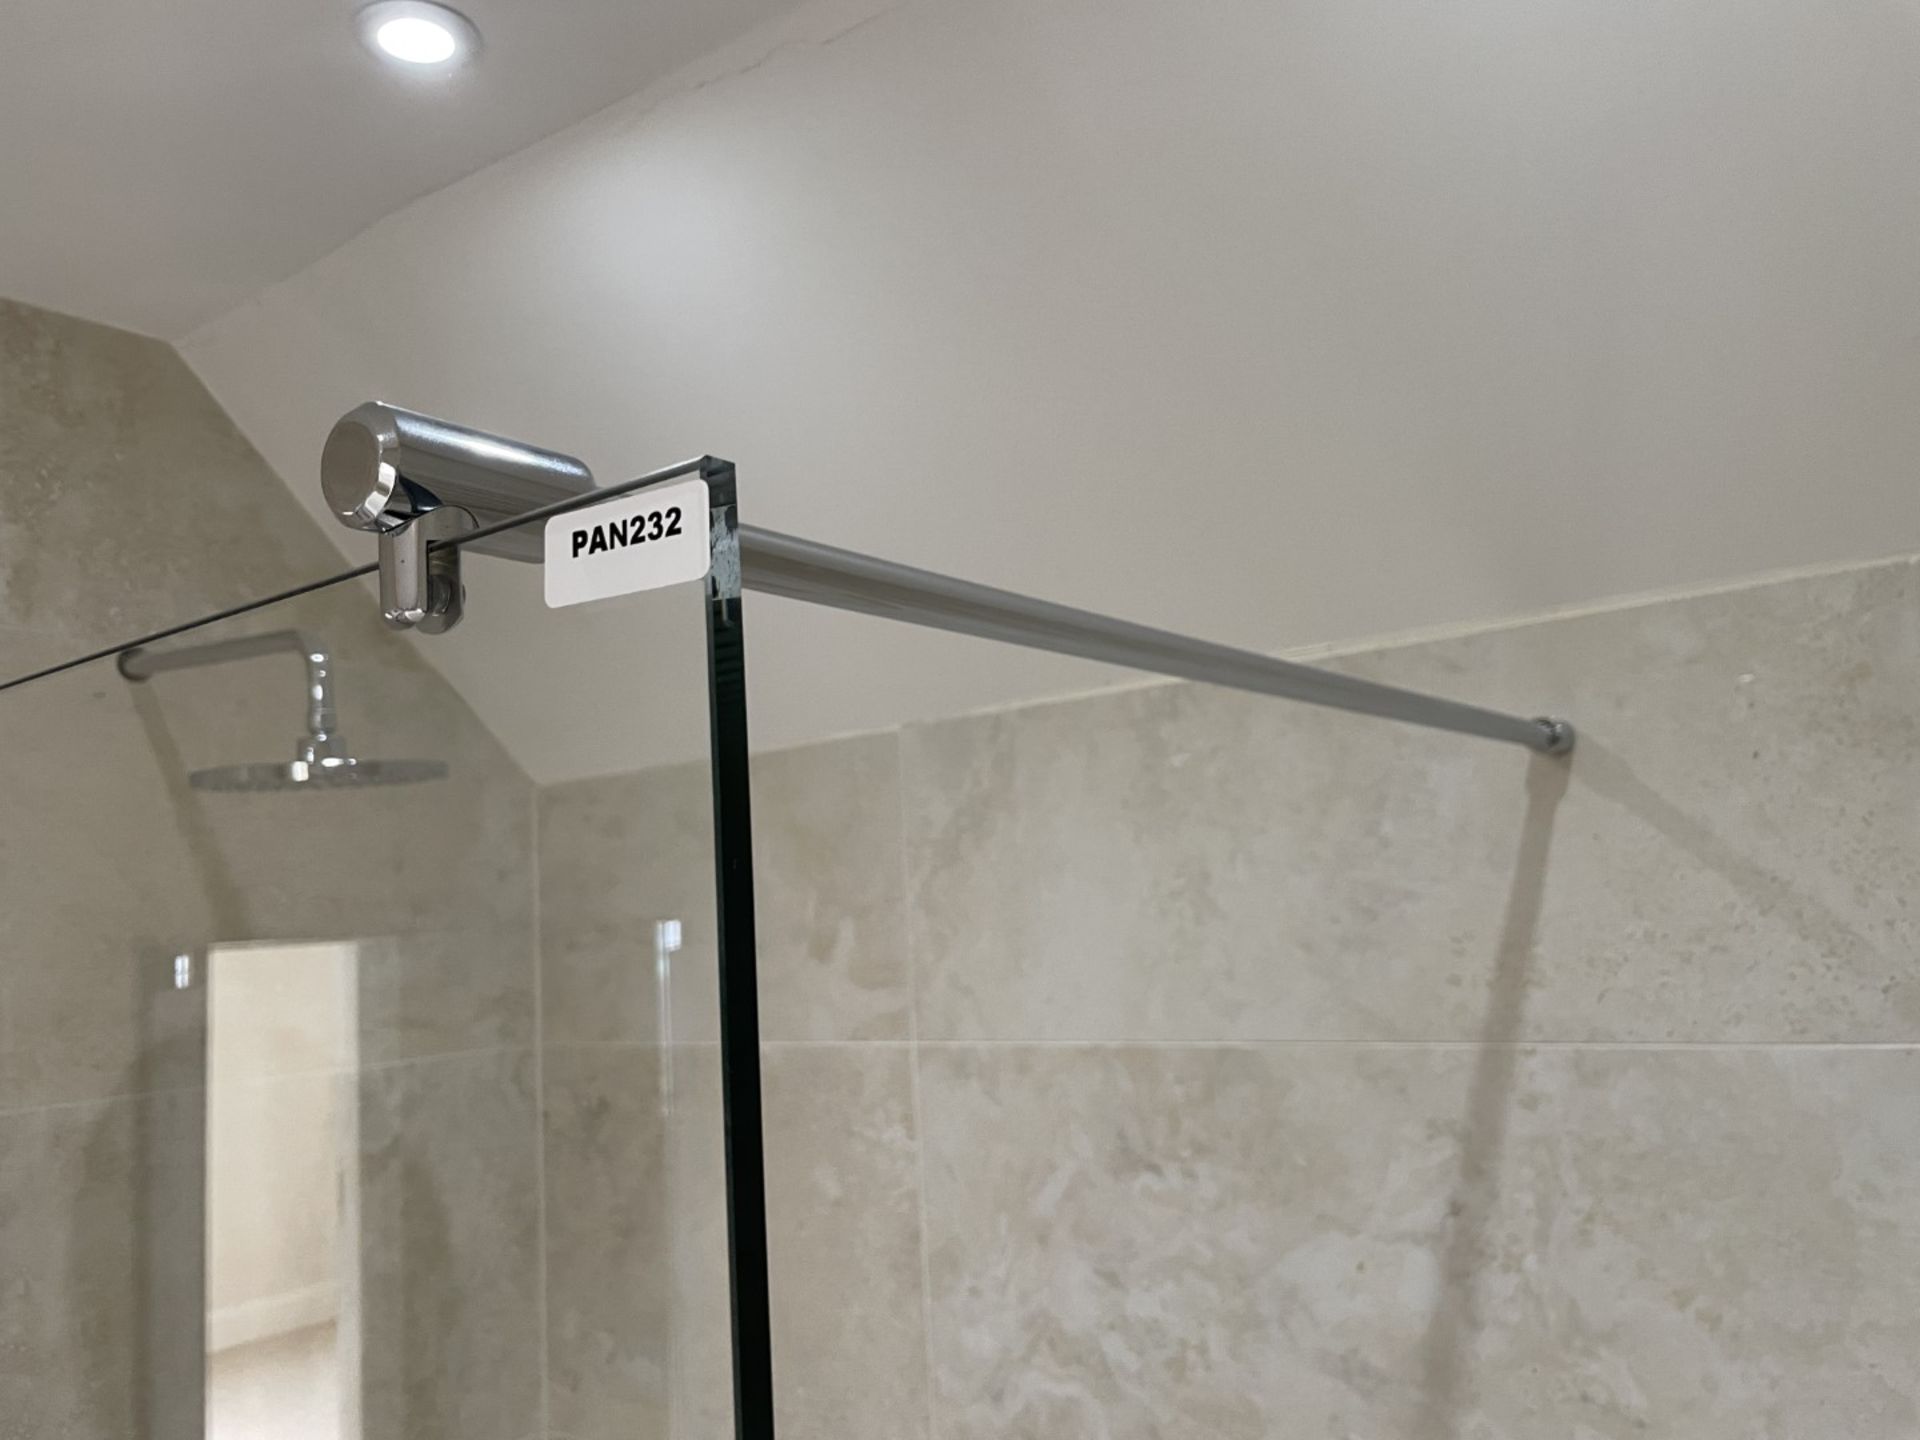 1 x Premium Shower and Enclosure + Hansgrove Controls and Thermostat - Ref: PAN232 - CL896 - NO - Image 20 of 21